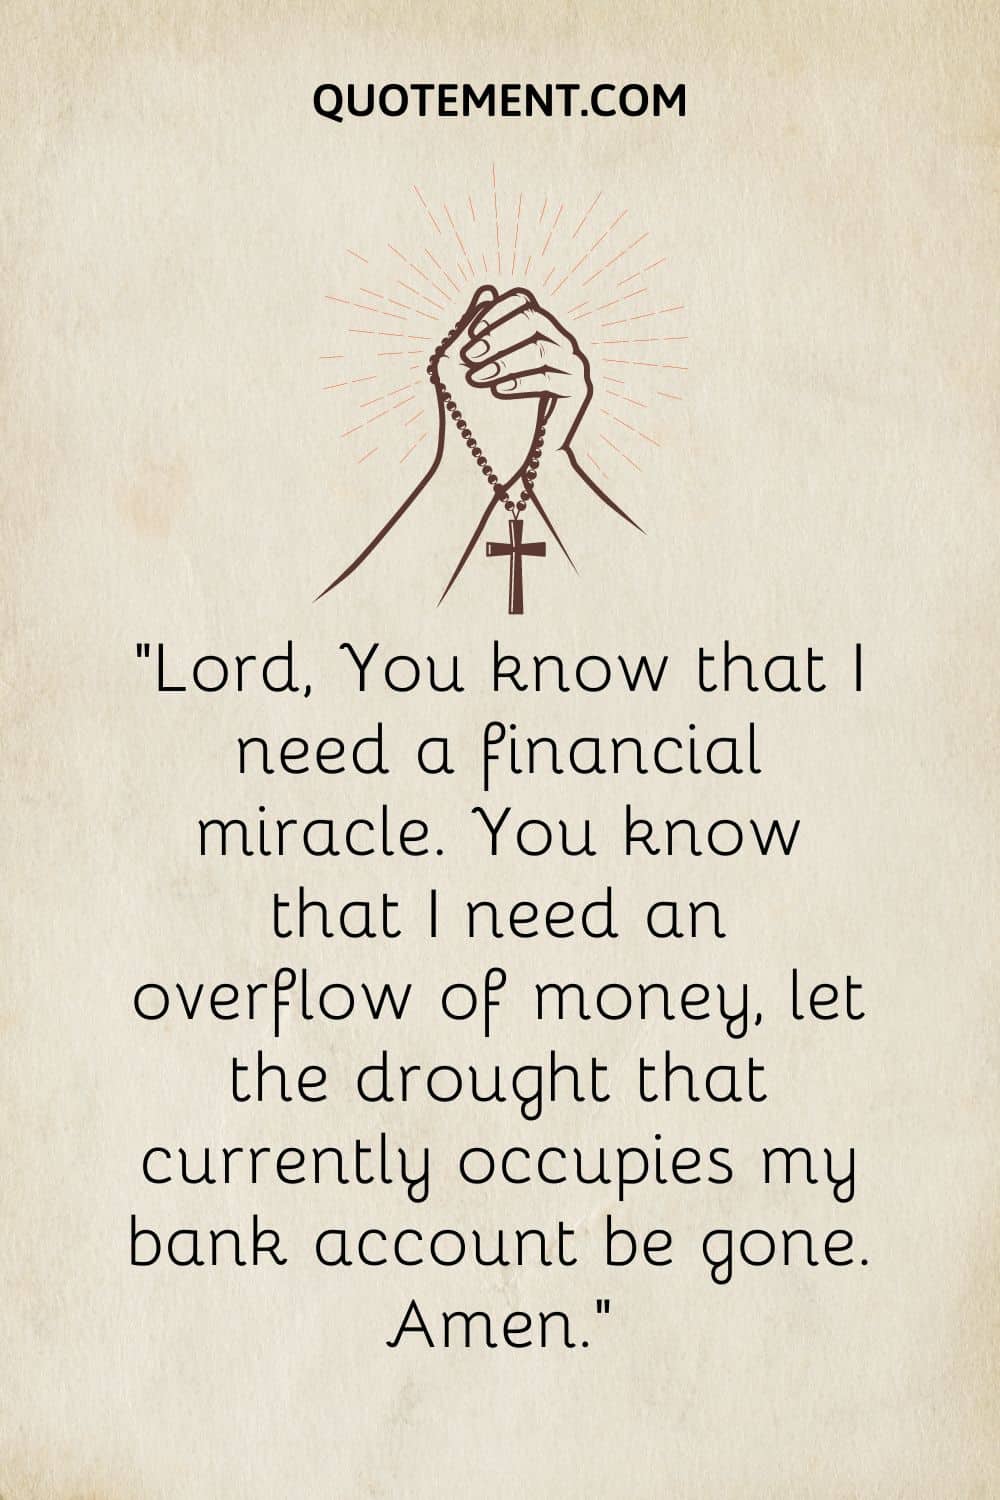 praying hands with a cross image representing prayer for financial miracle